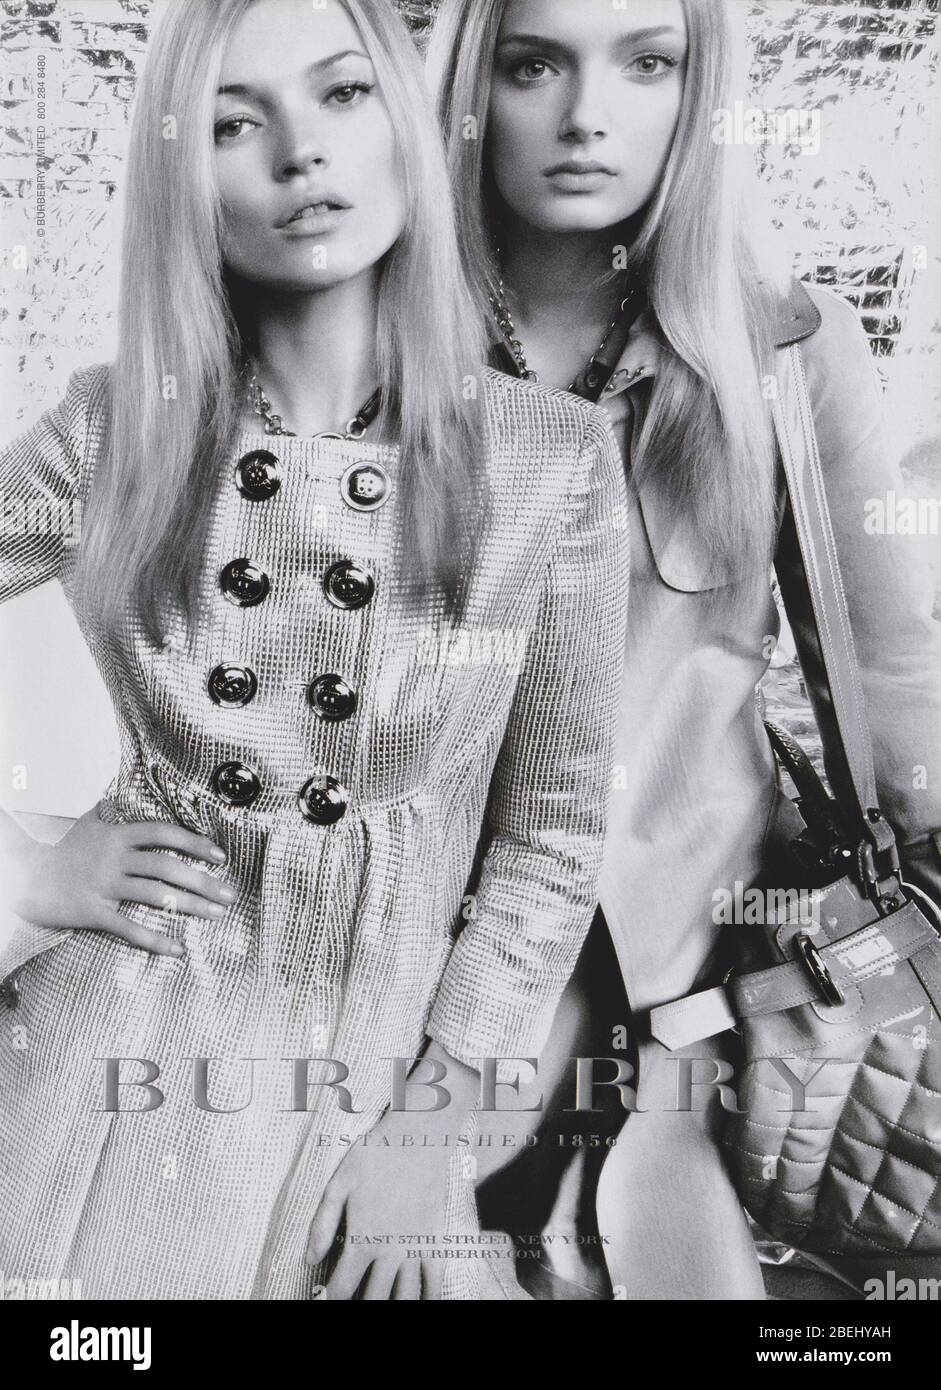 poster Burberry house with Kate Moss, Lily Donaldson in paper magazine from 2007, advertisement, creative Burberry 2000s advert Stock Photo - Alamy